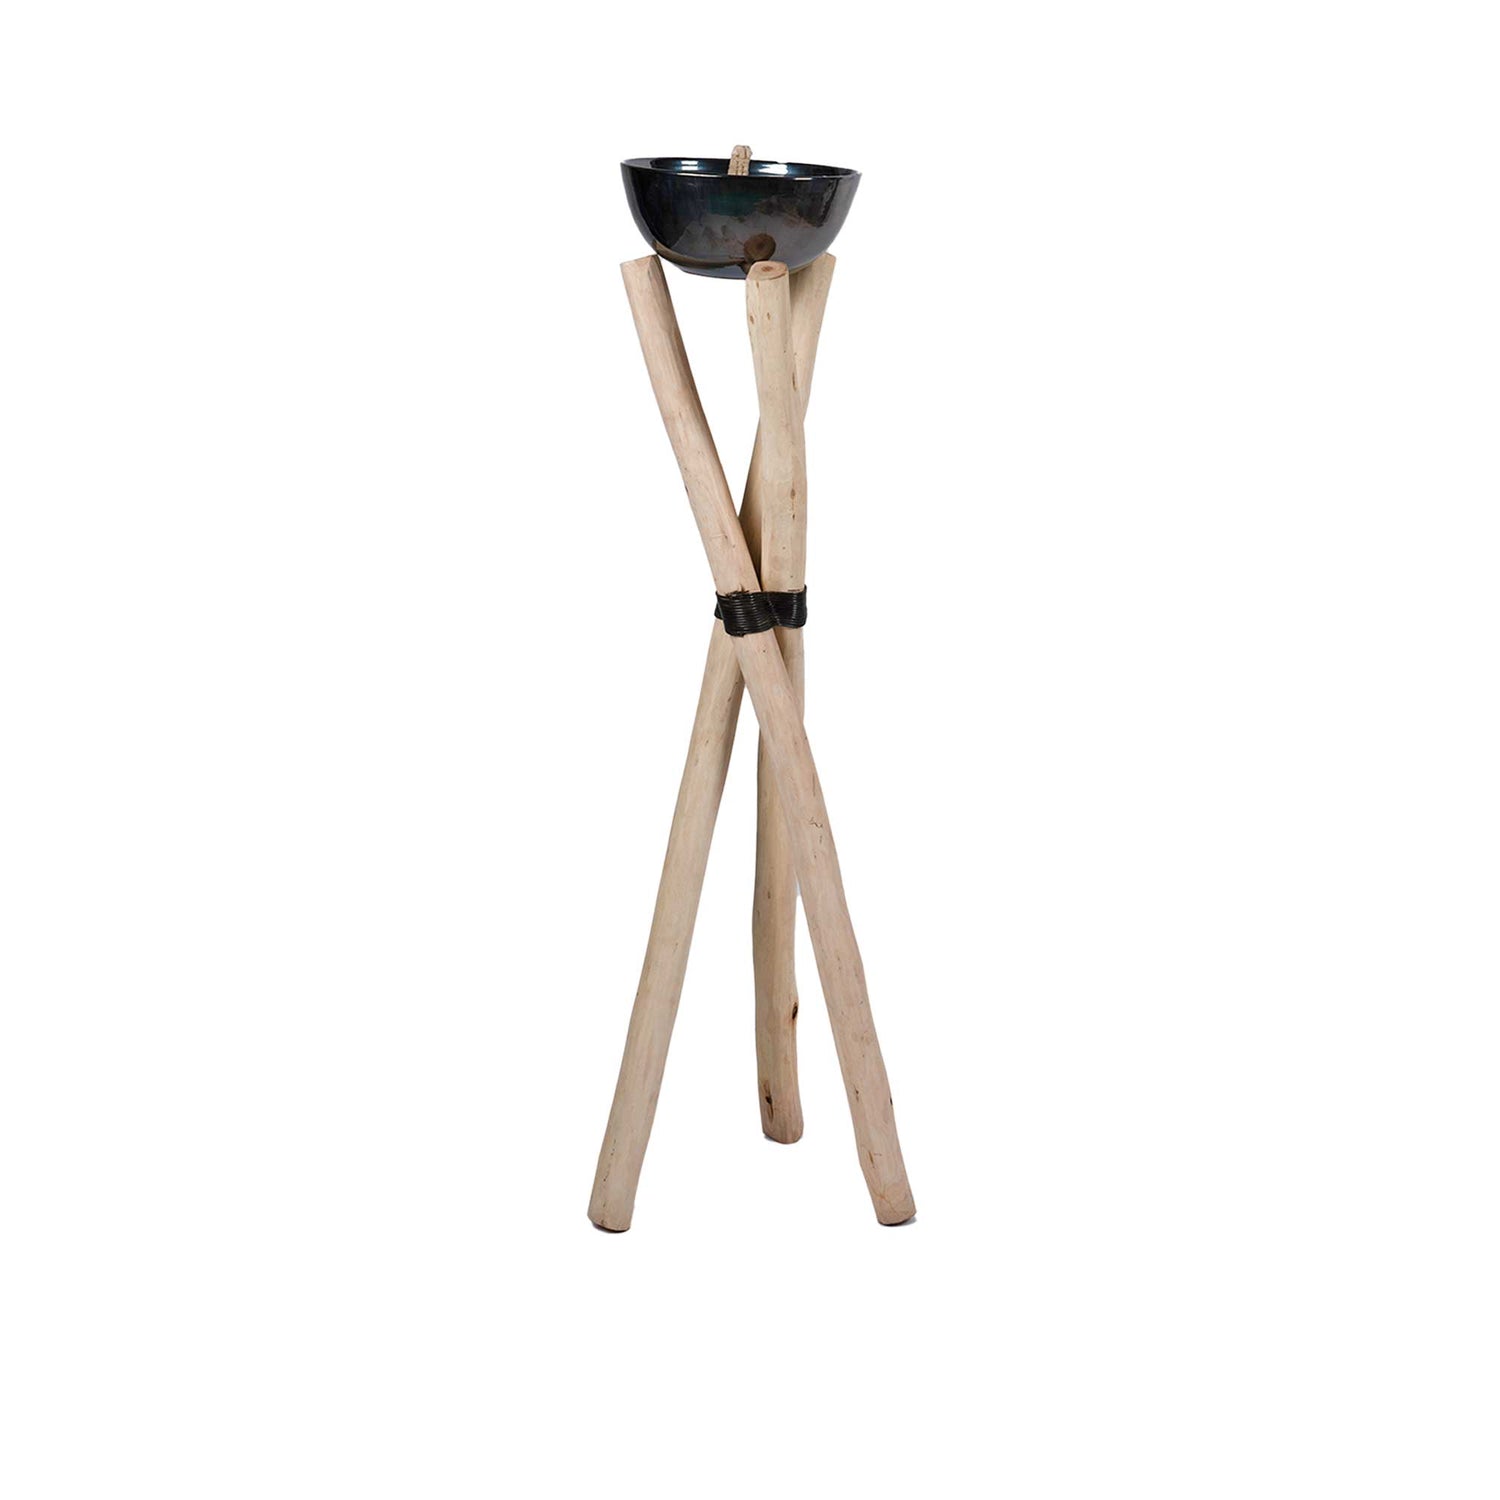 BAMBOO WOODEN TRIPODS